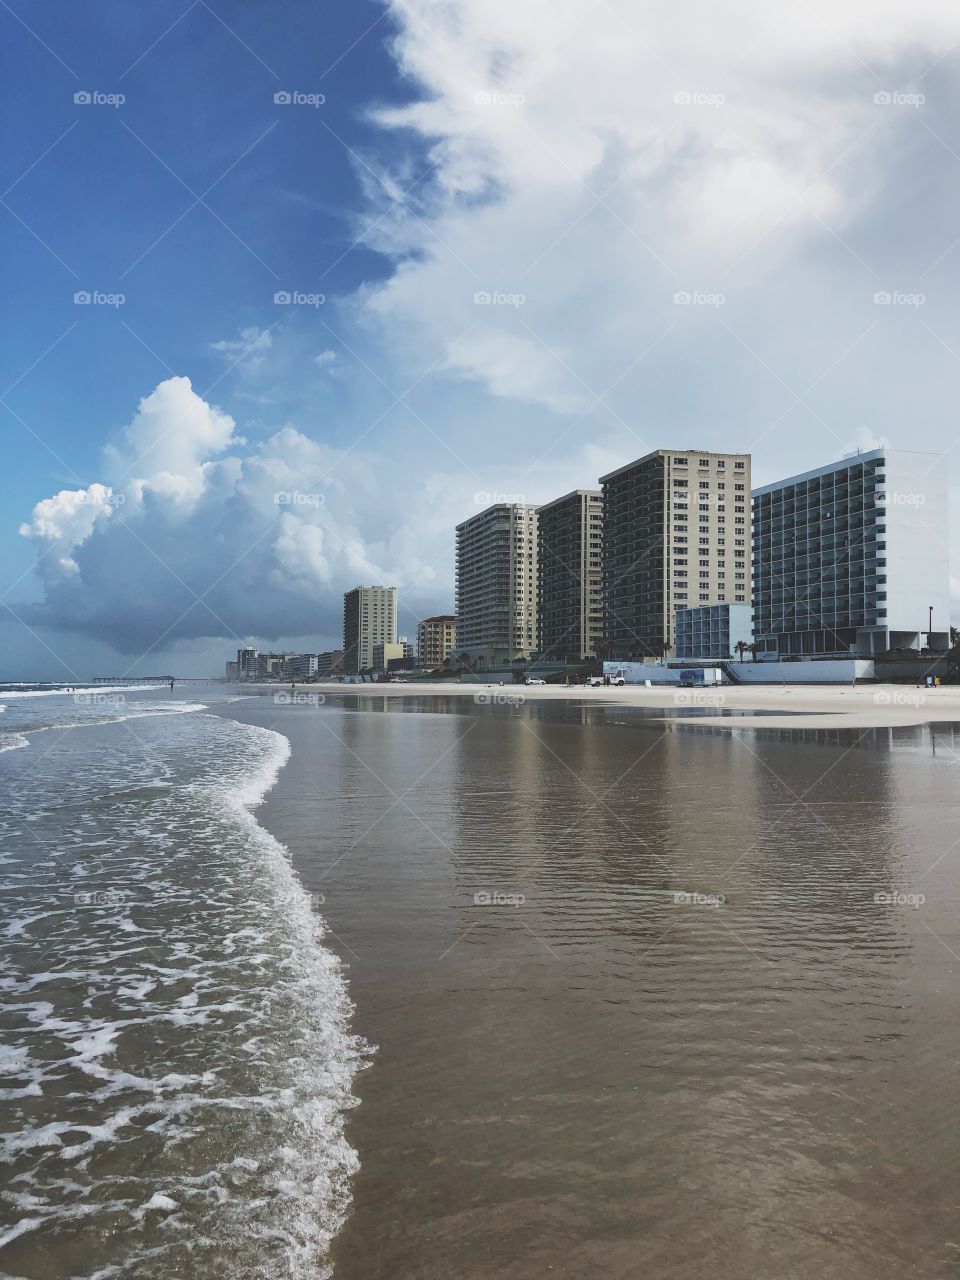 The marvelous Daytona beach in all its glory! Clear waters, blue skies, and buildings as tall and high as the eye can see. 